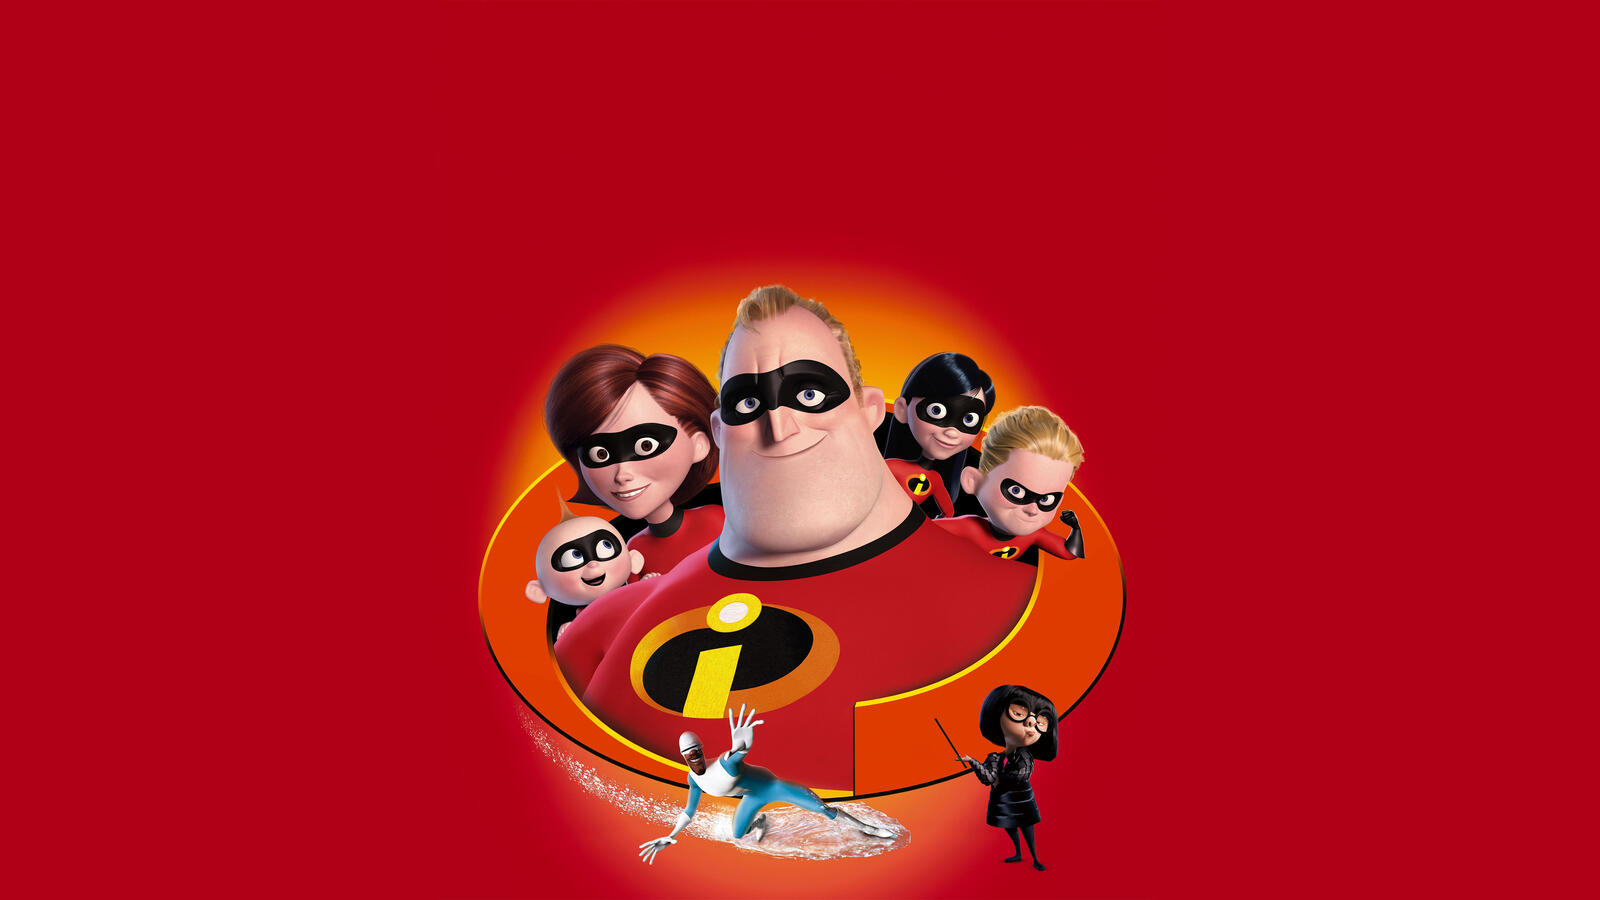 Wallpapers animated movies The Incredibles 2 games on the desktop